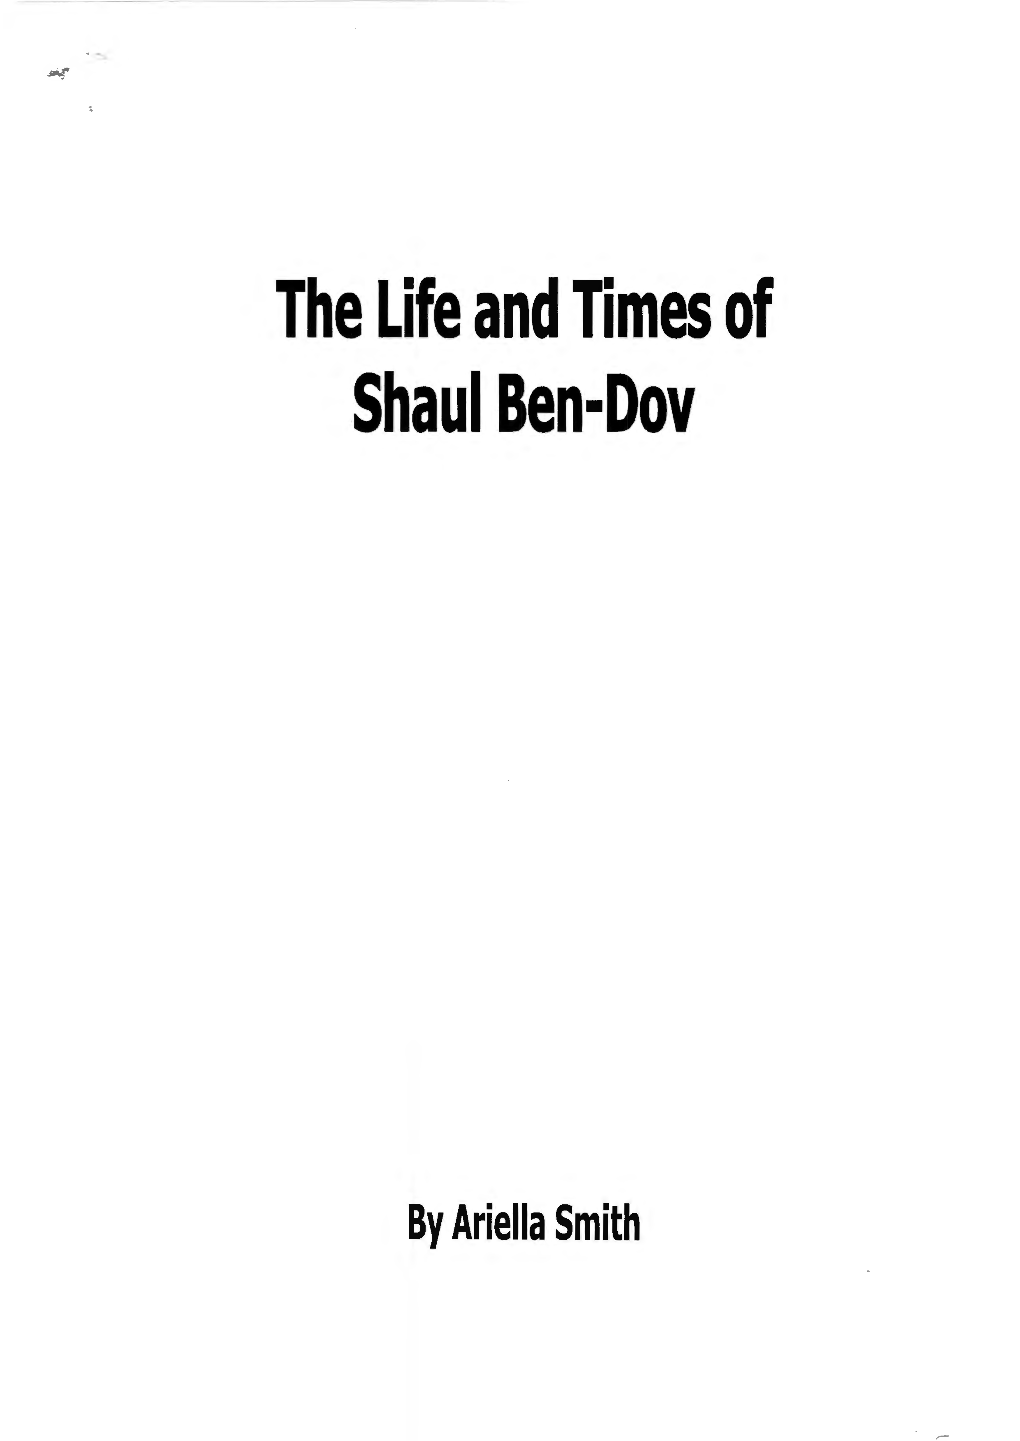 The Life and Times of Shaul Ben-Dov